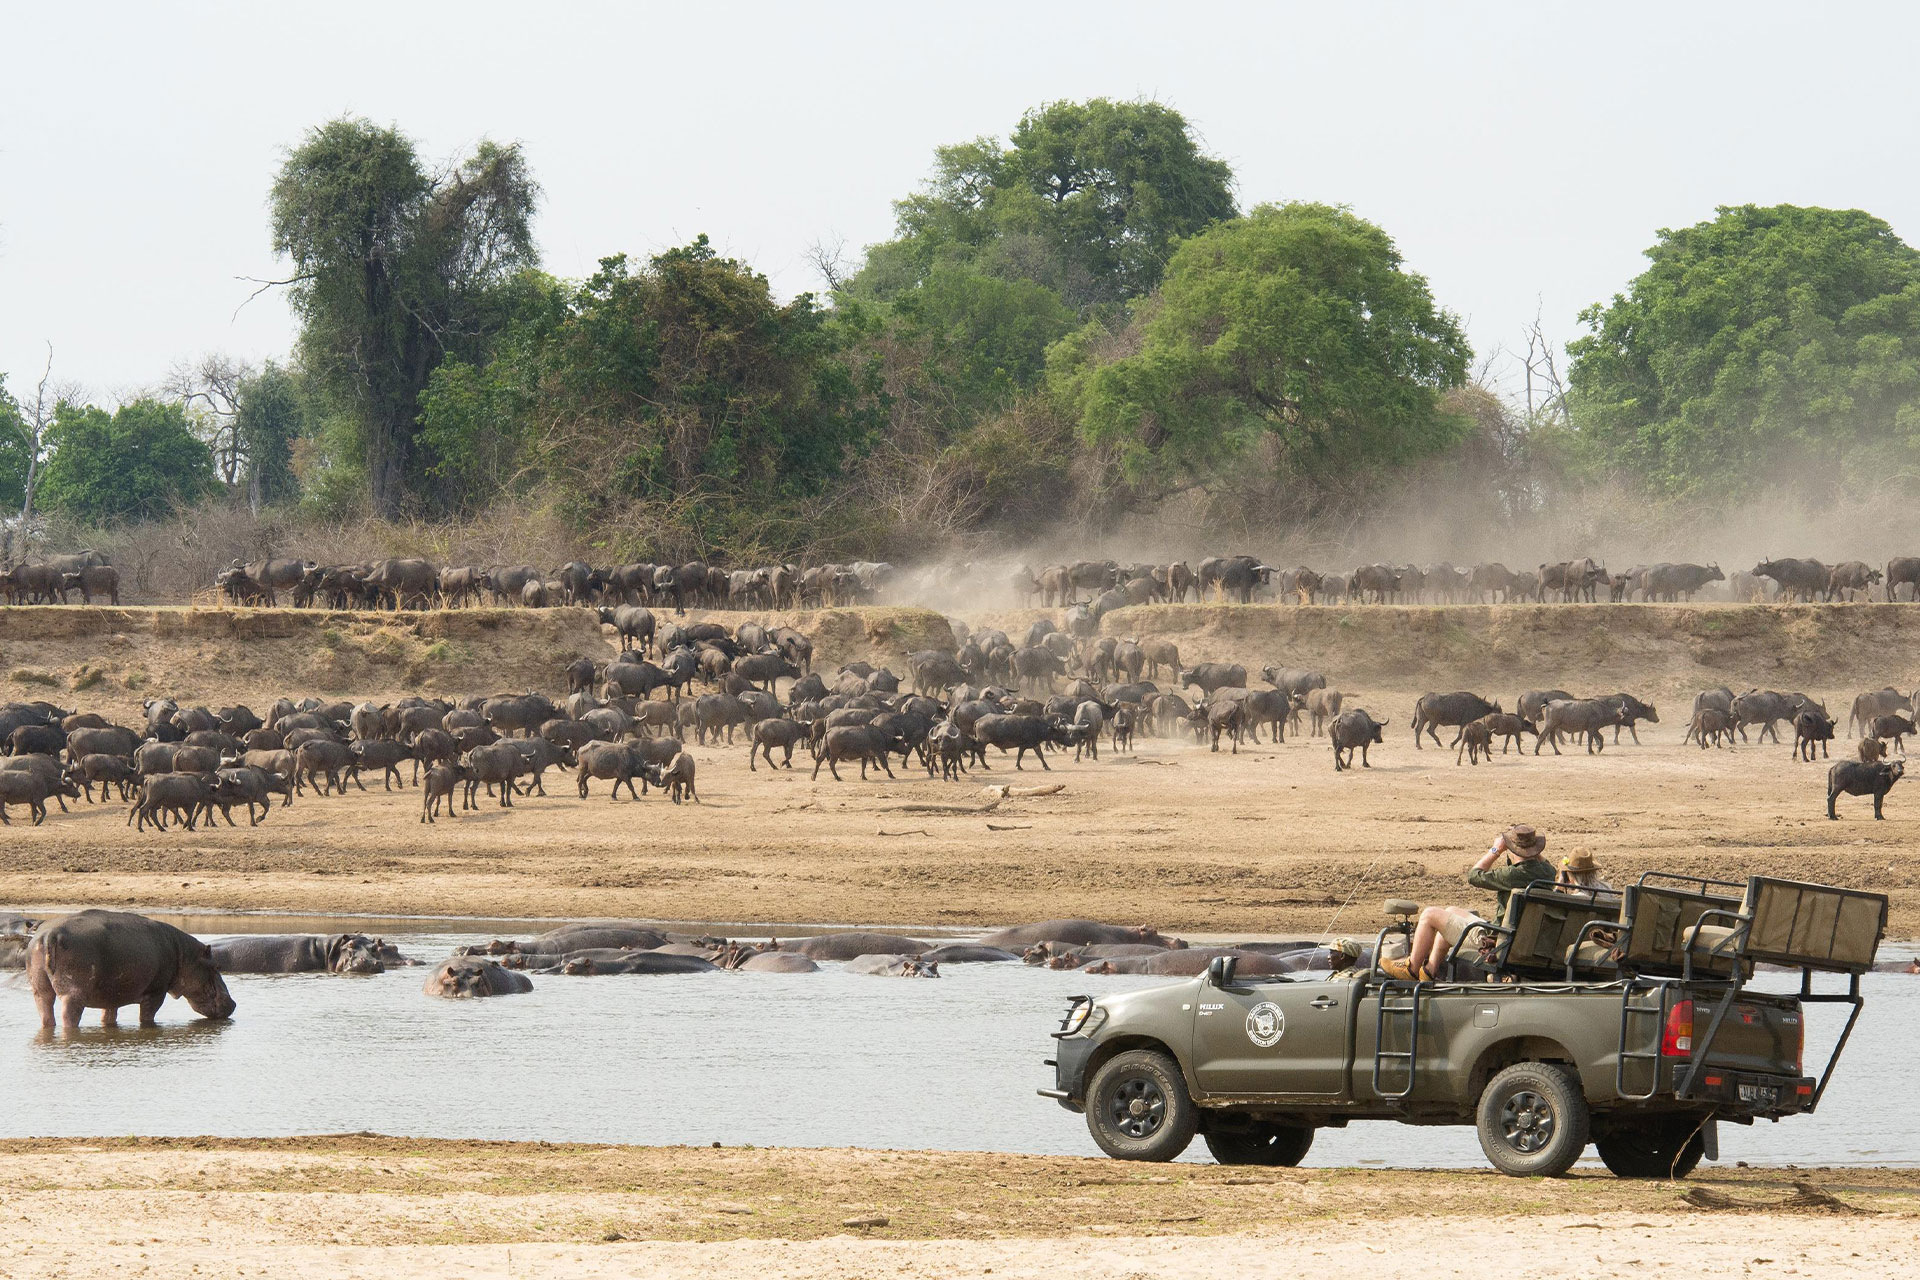 Hippos and wildebeest on a safari in Africa.